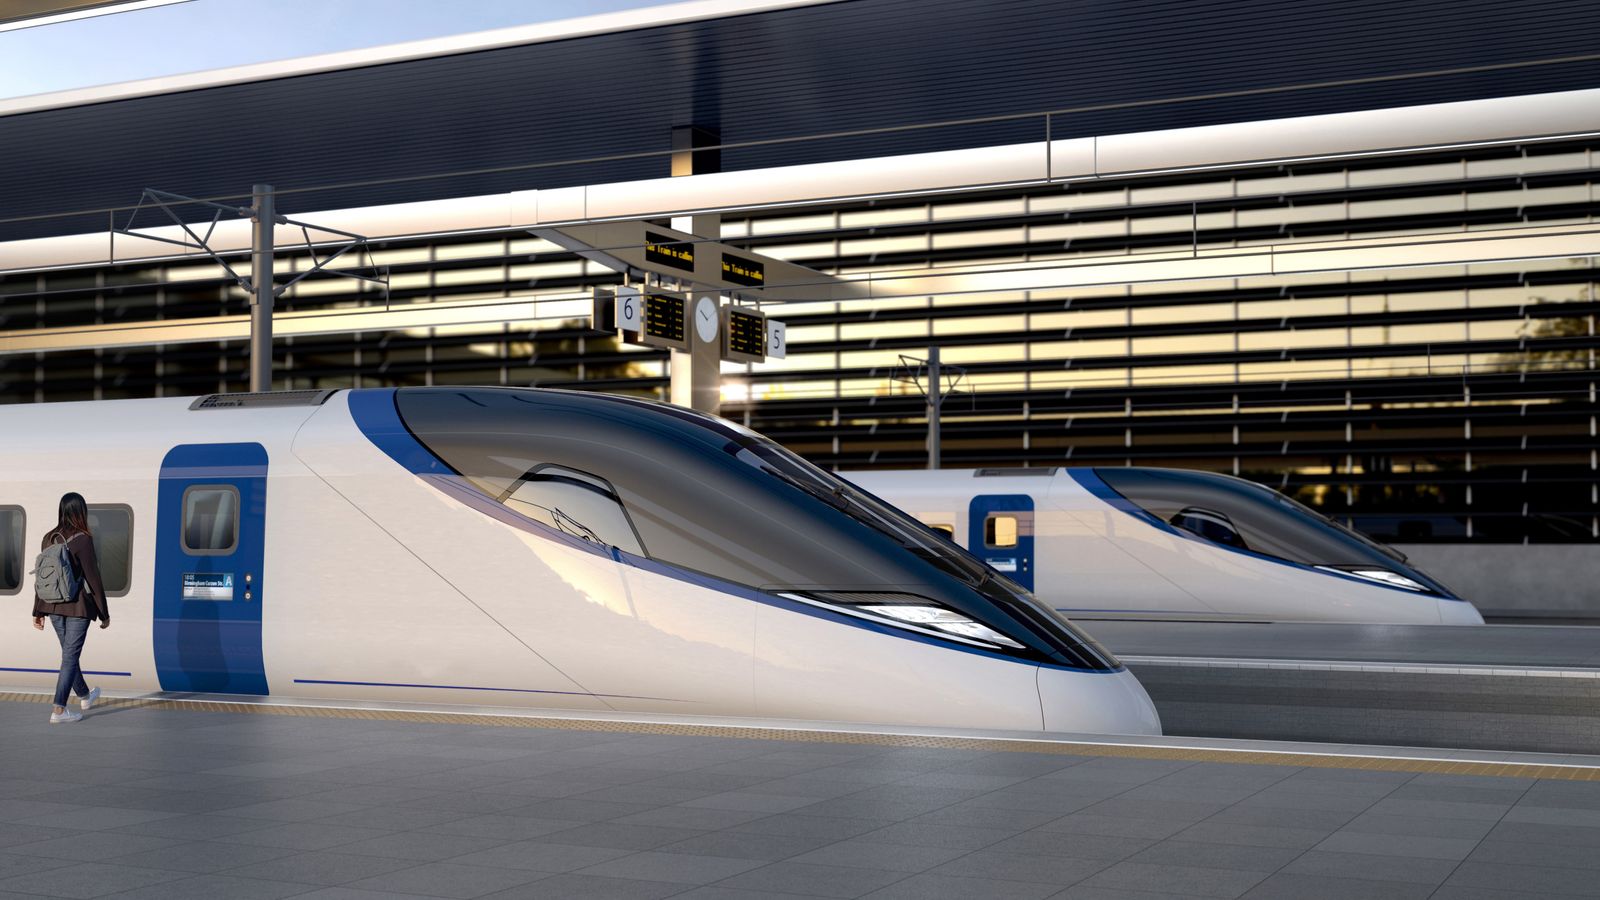 HS2 will go to Manchester - but from Birmingham it will run on existing tracks